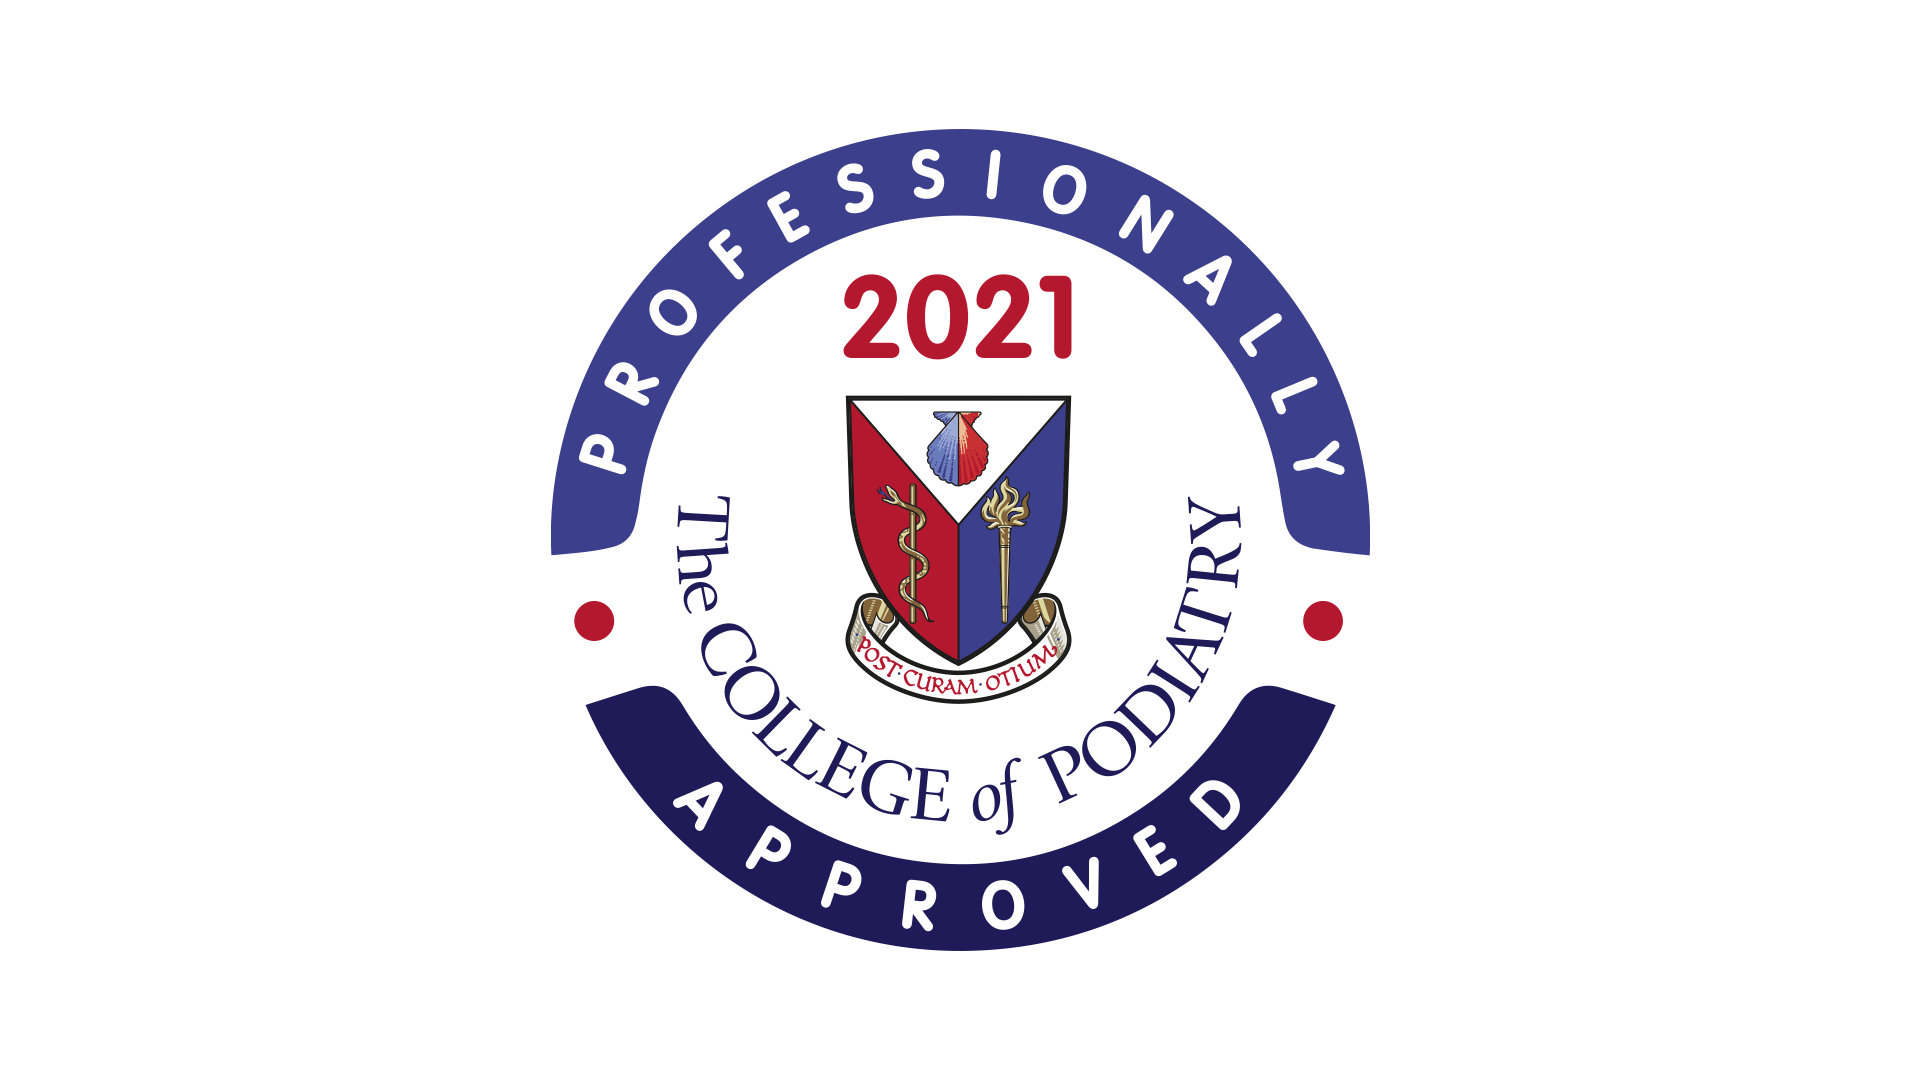 Logo: The College of Podiatry Professionally Approved 2021